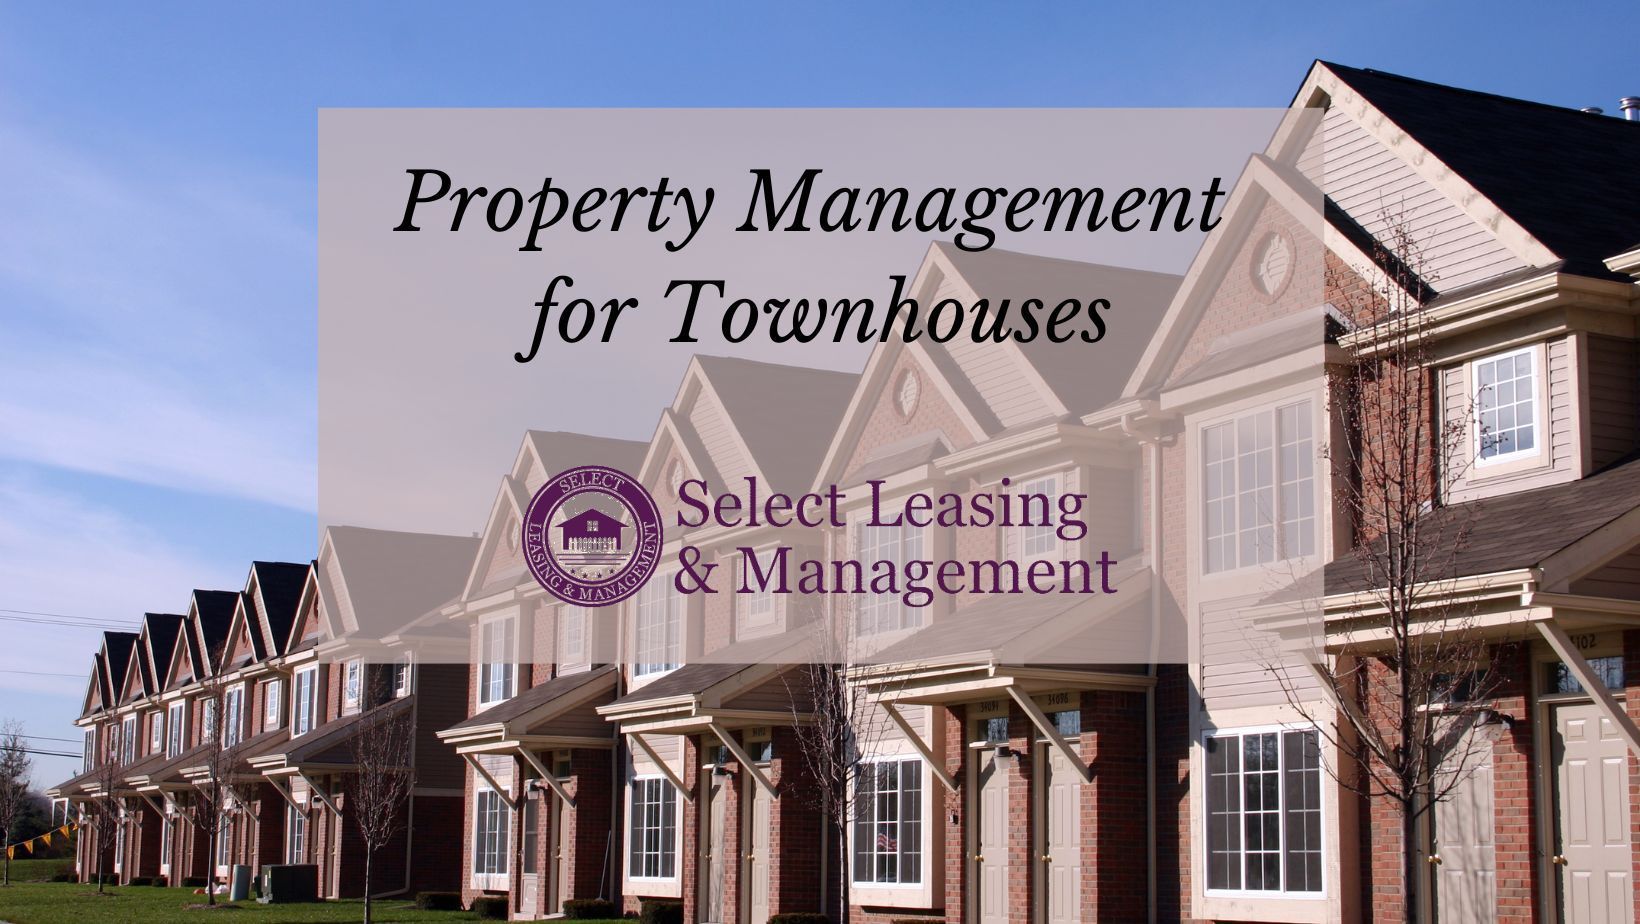 Property Management for Townhouses